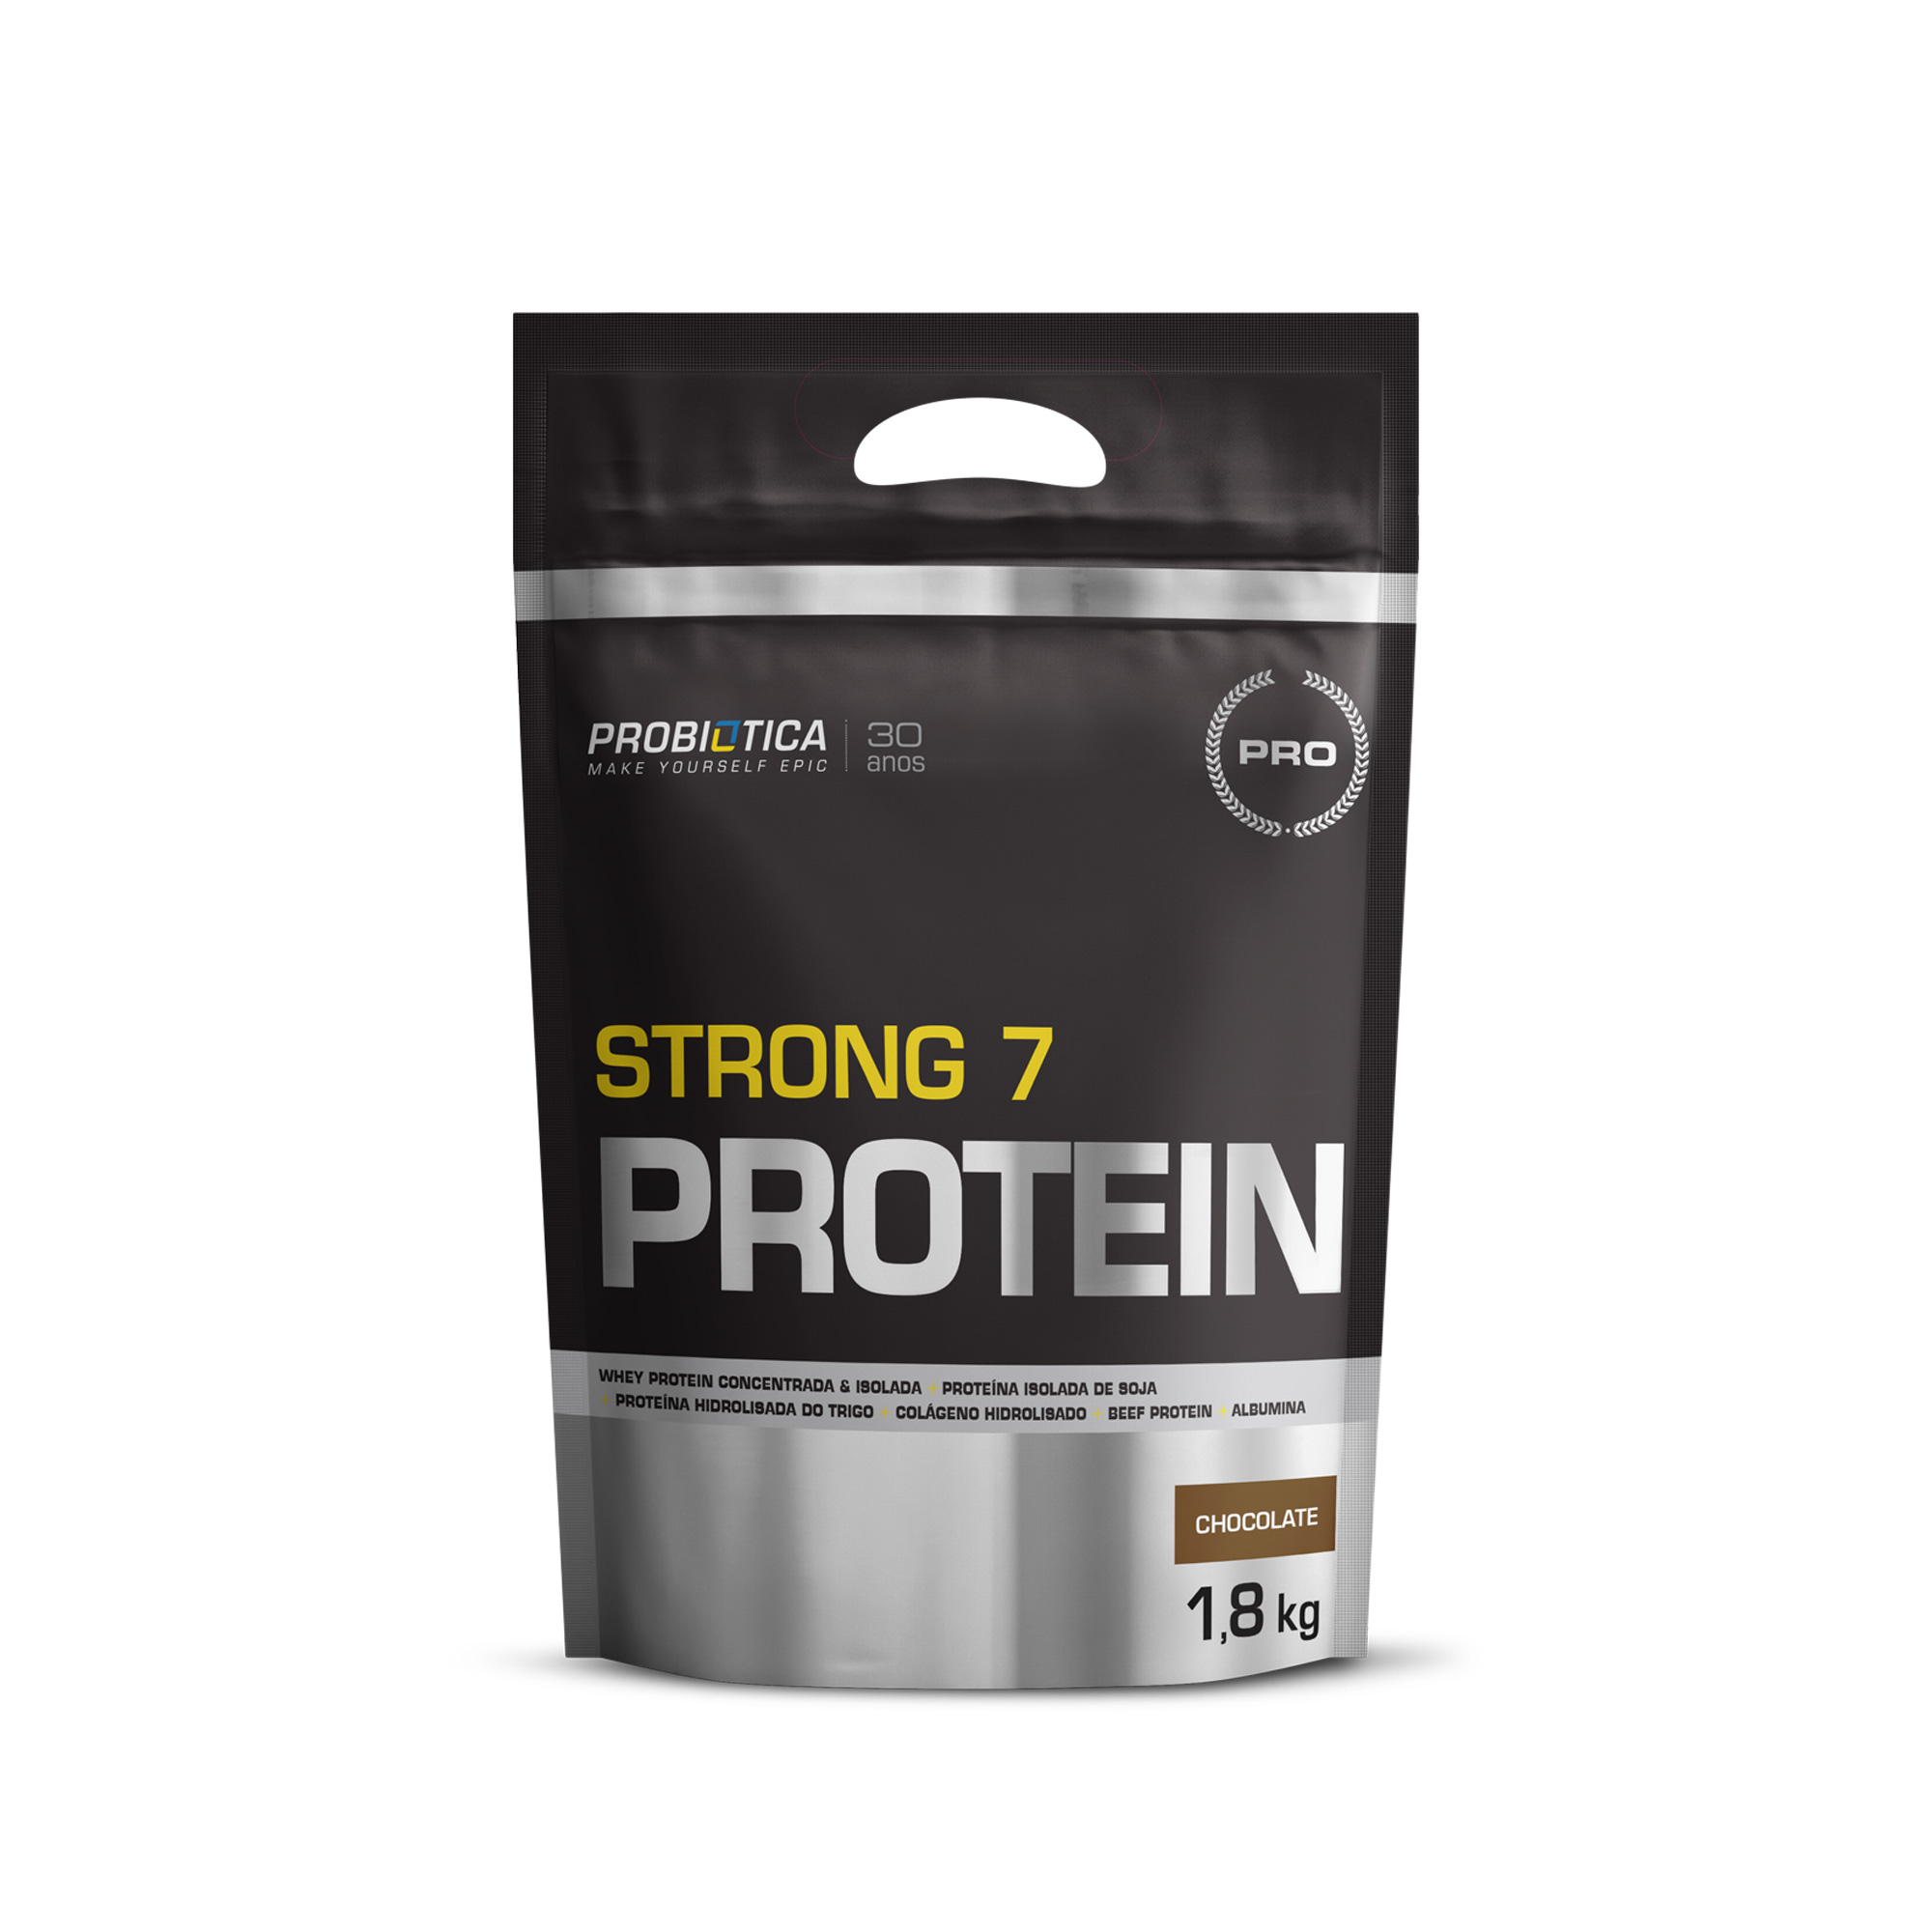 Strong 7 Protein Refil Chocolate Probiotica 1,8kg